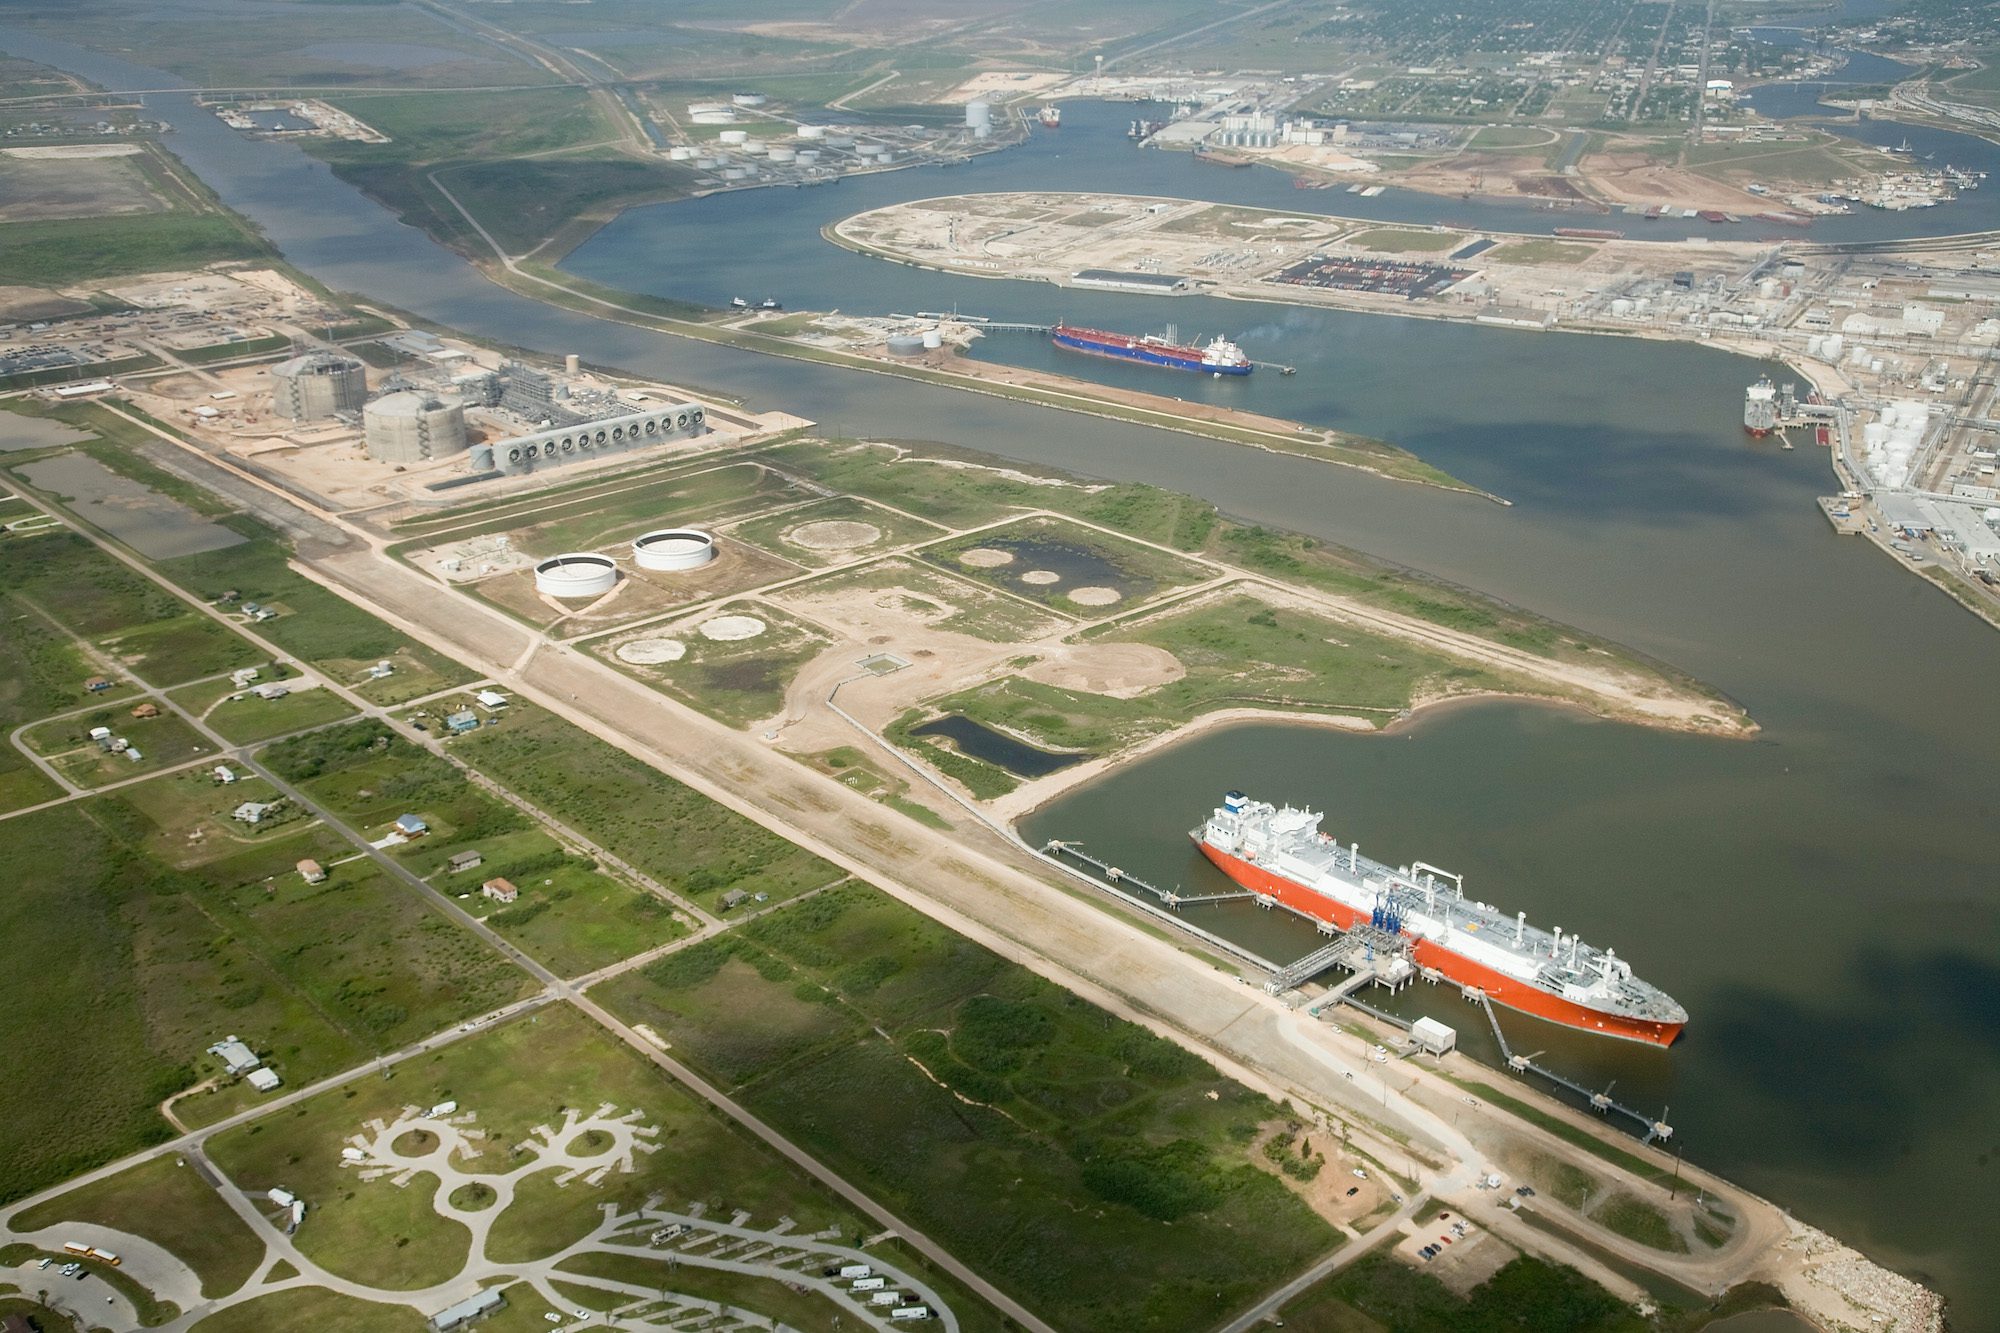 Explosion Reported at Freeport LNG Facility in Texas